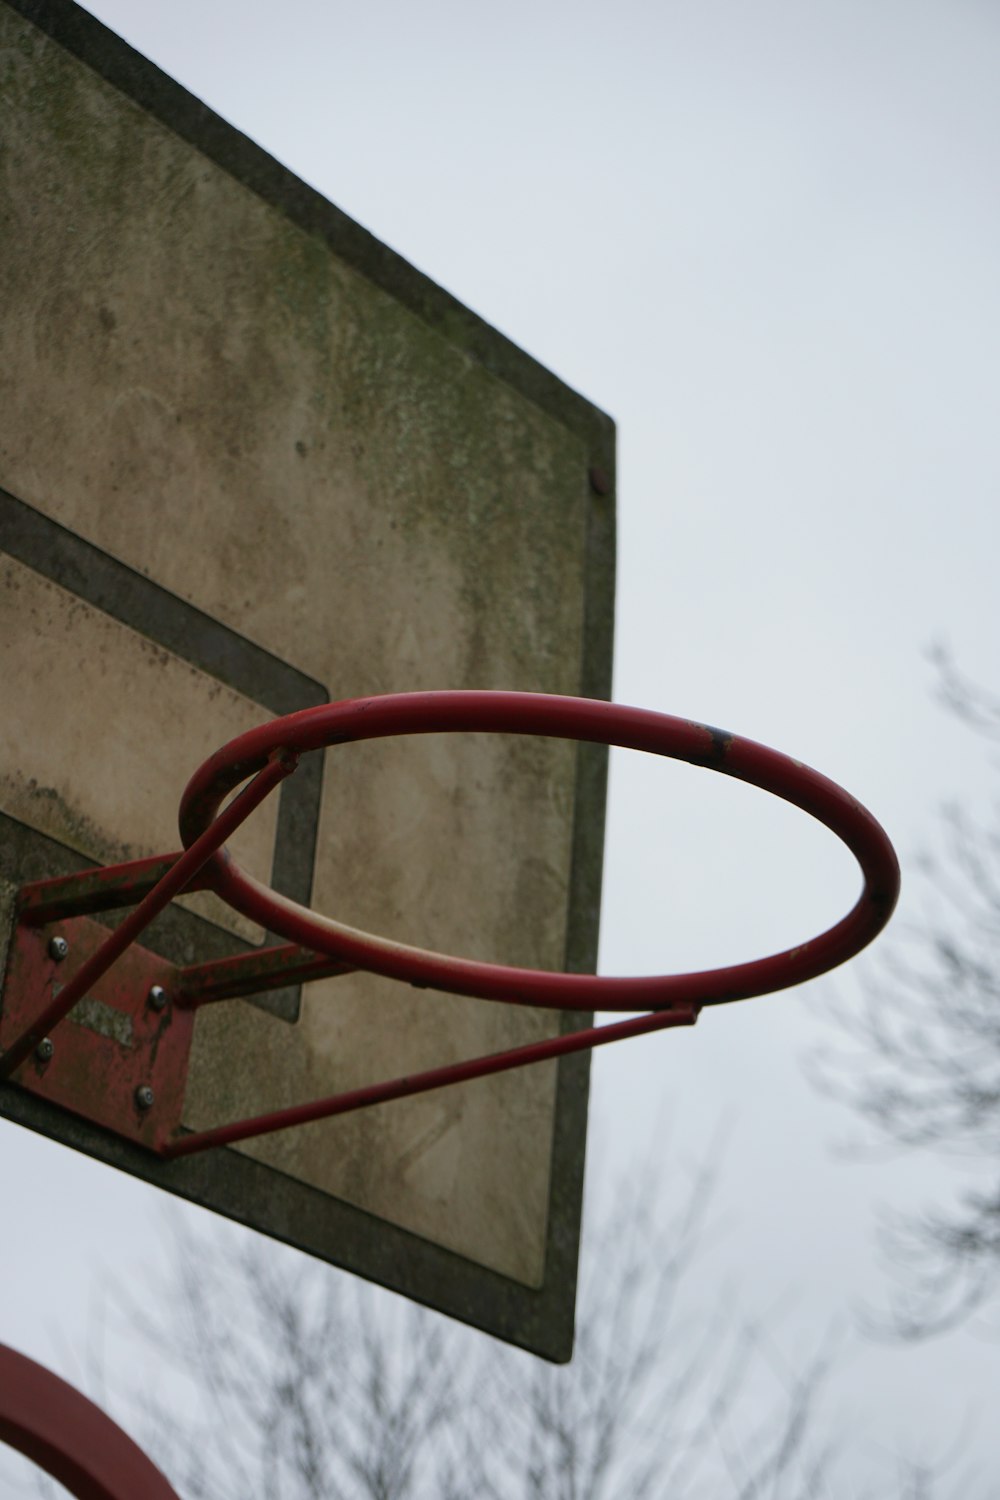 a close up of a basketball hoop with trees in the background